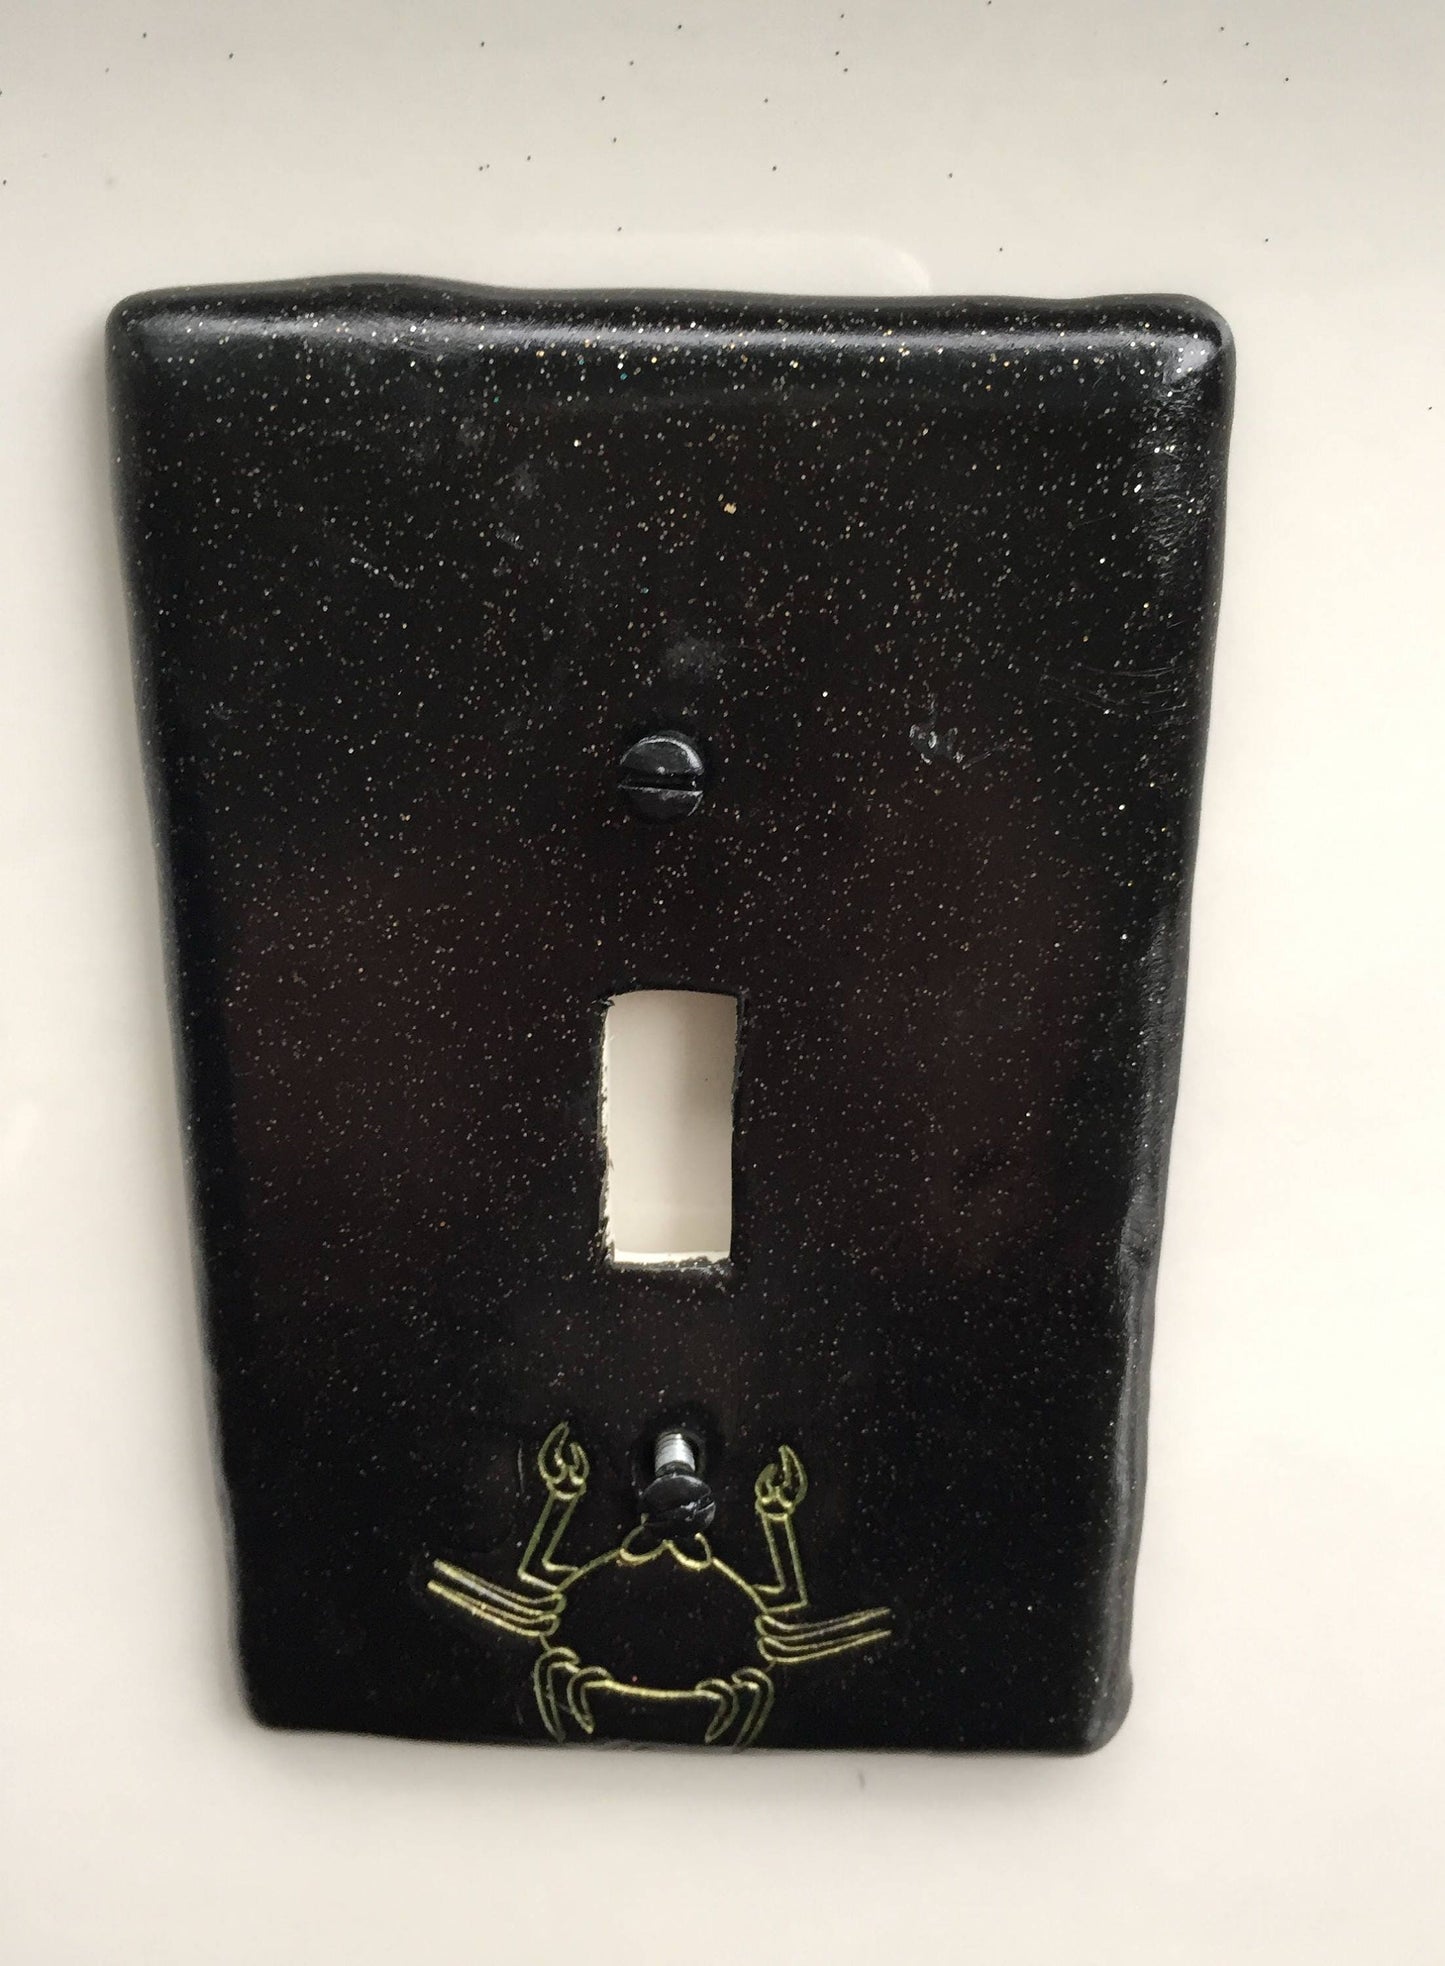 Cancer the Crab light switch plate cover for single toggle switch plate cover, black with glitter green custom colors available